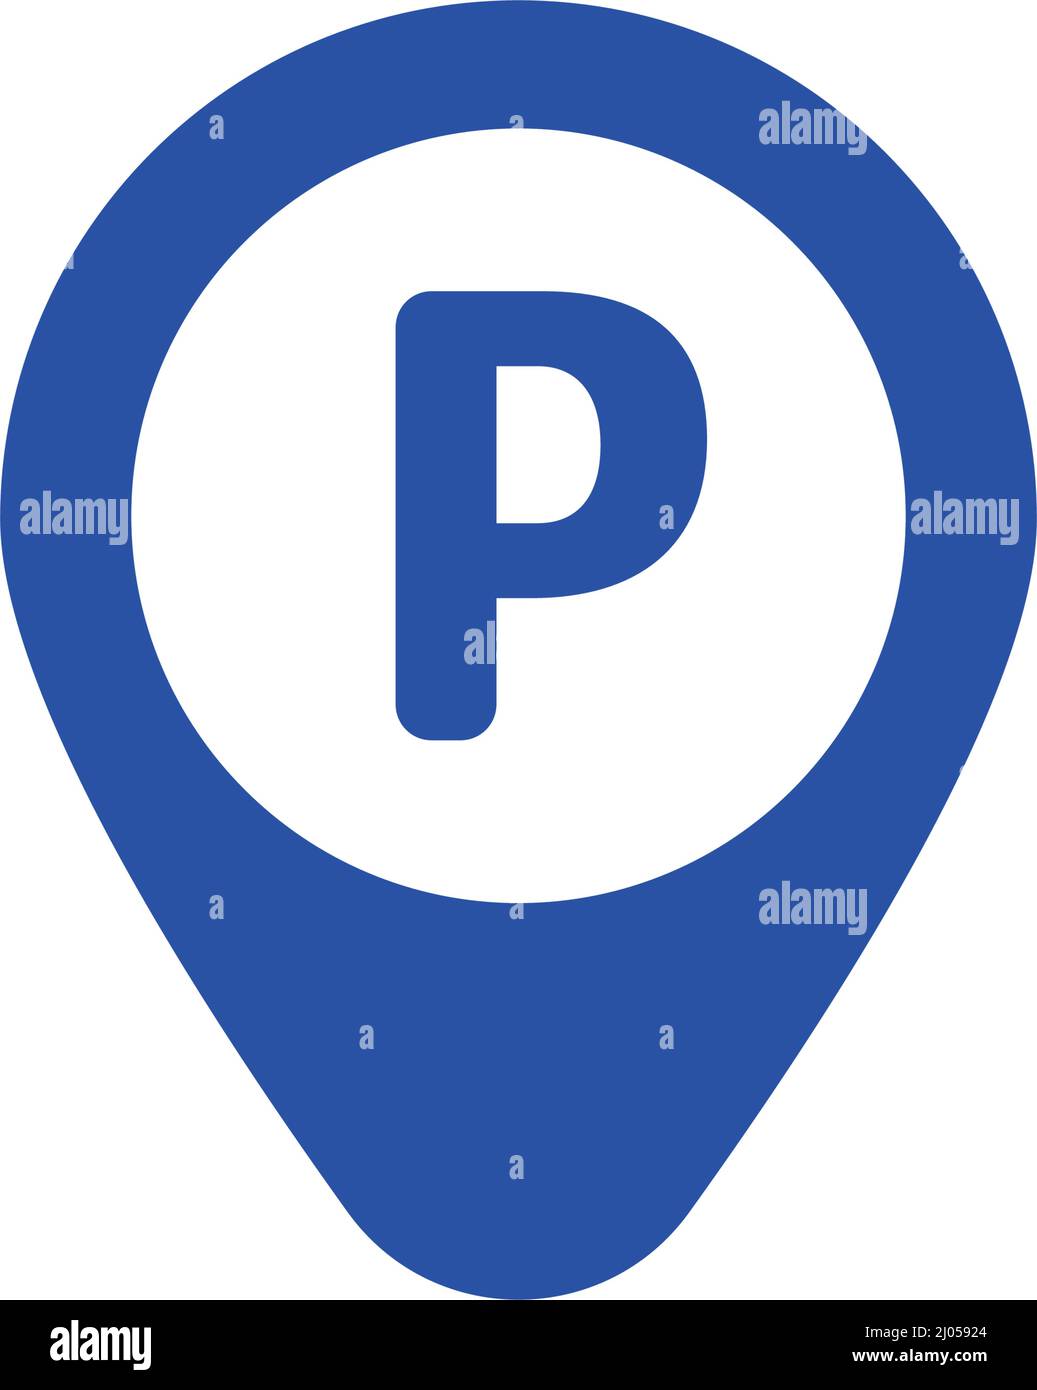 Map pin for parking lot. Parking lot location information. Editable vectors. Stock Vector